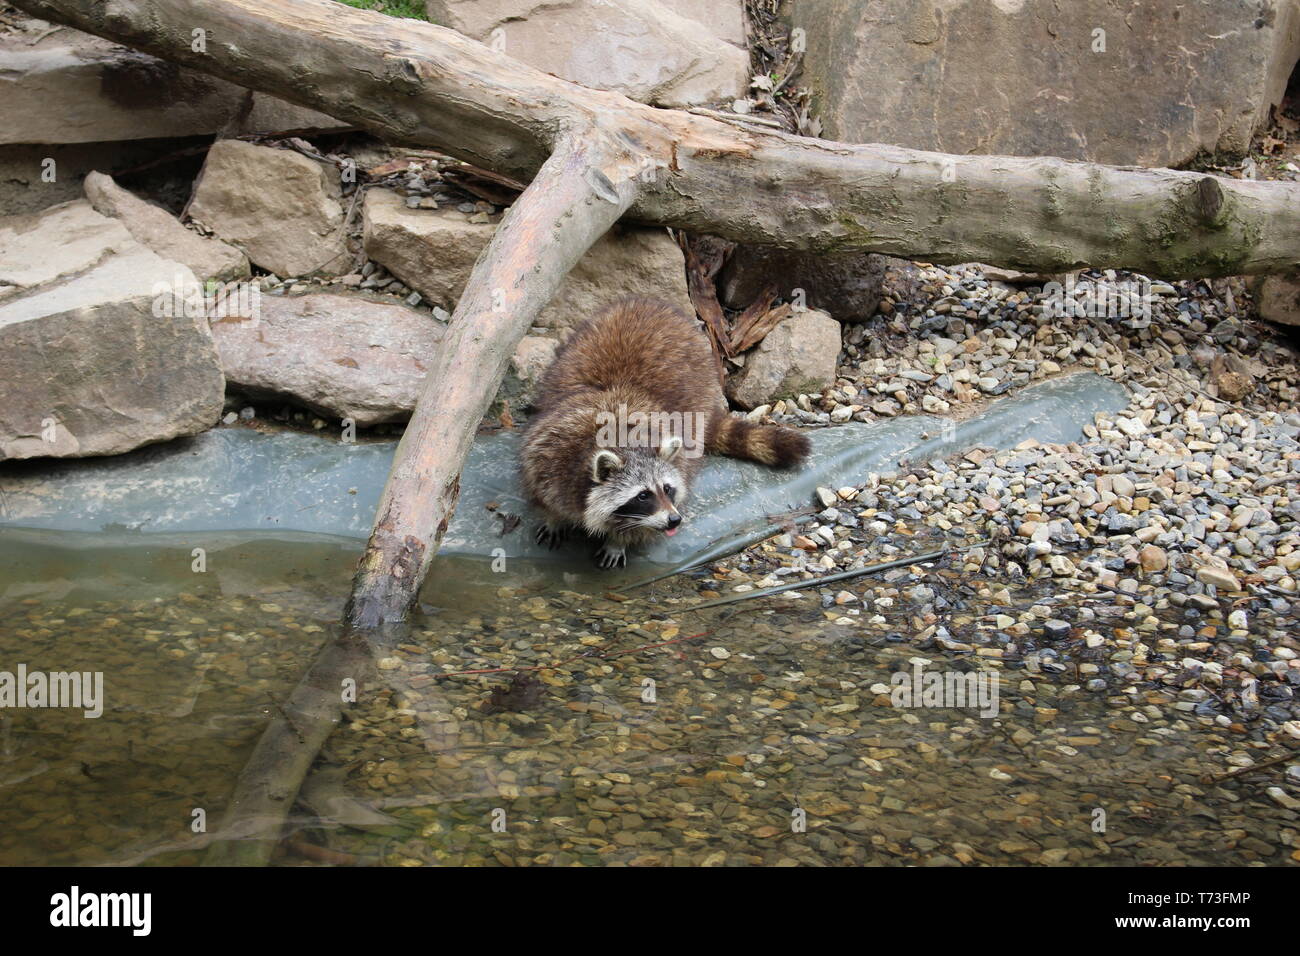 Raccoon HD Wallpaper Cute Nature Photography Raccoon drinking water and  climbing tree in zoo in Germany Background Image Photo Picture Funny Animals  Stock Photo - Alamy